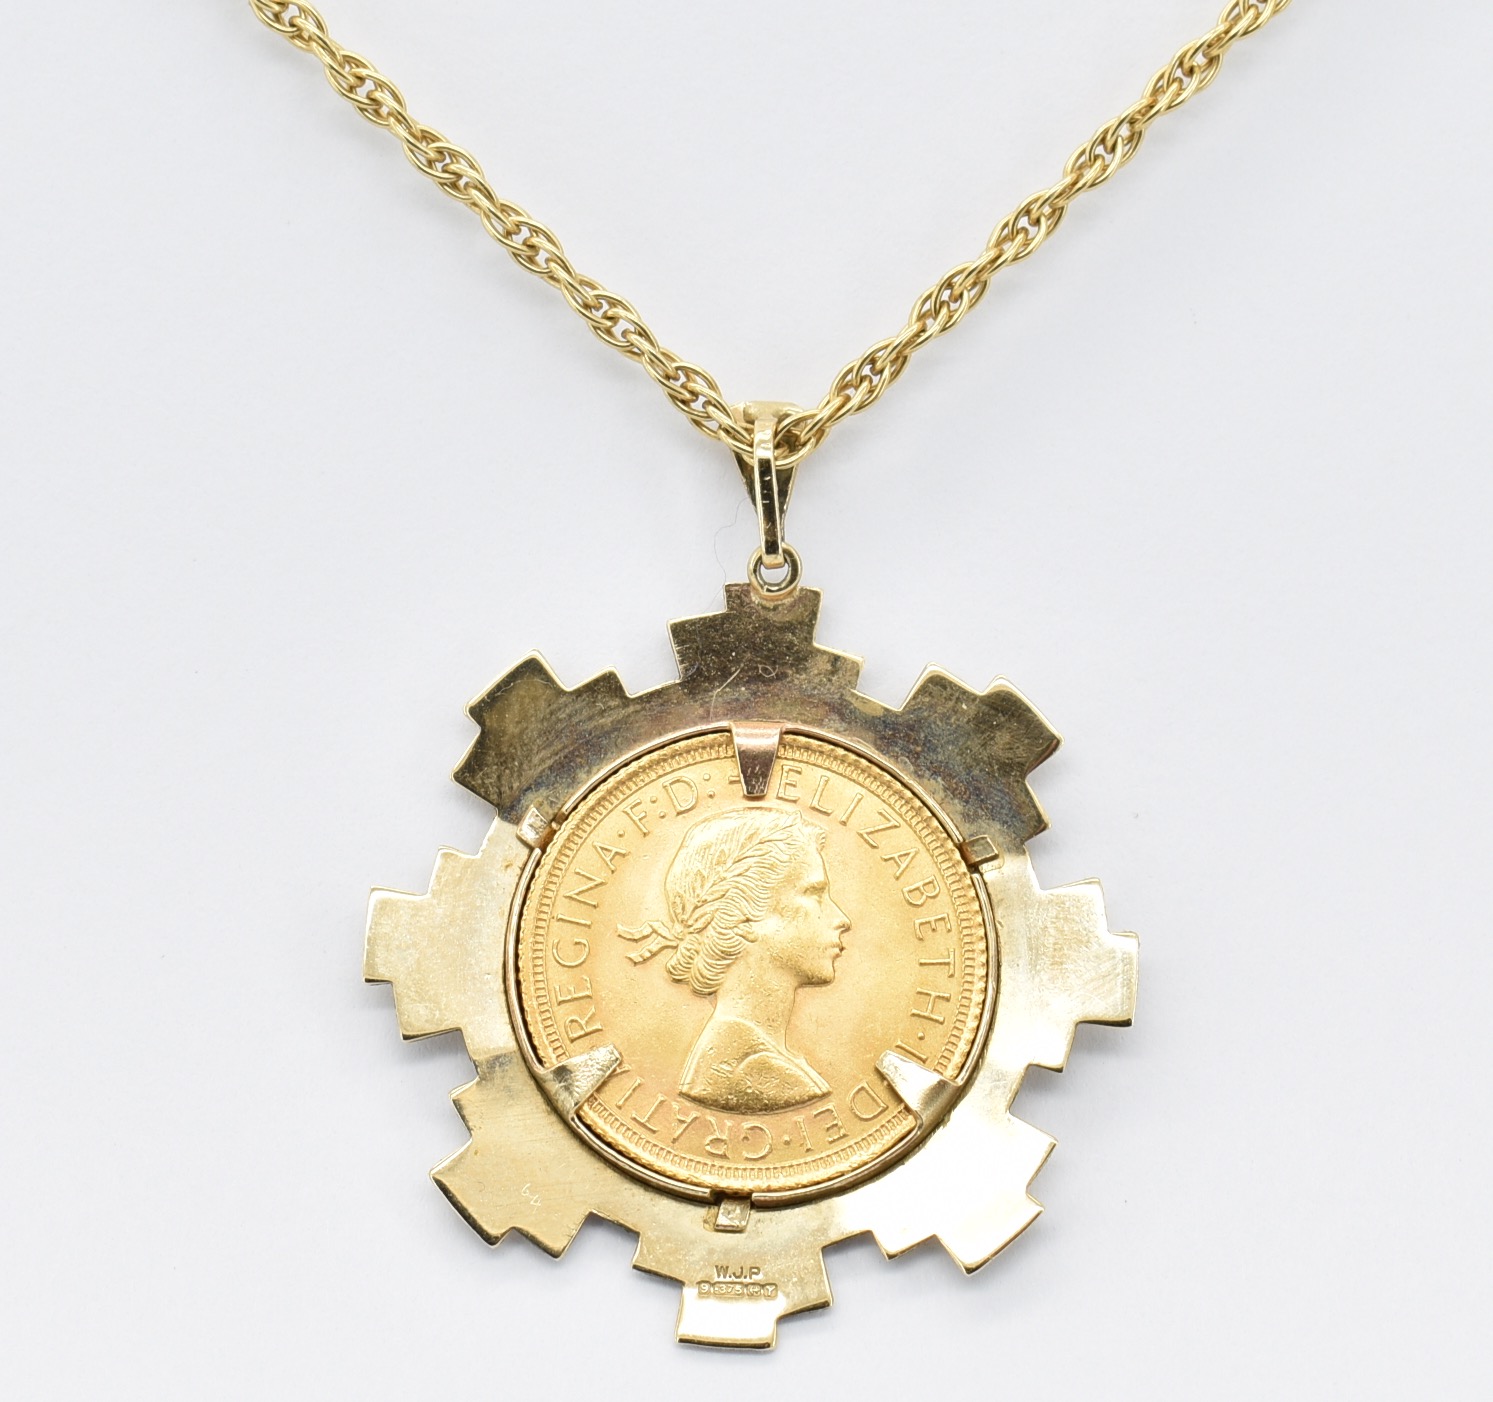 MOUNTED 1965 FULL GOLD SOVEREIGN PENDANT NECKLACE - Image 2 of 5